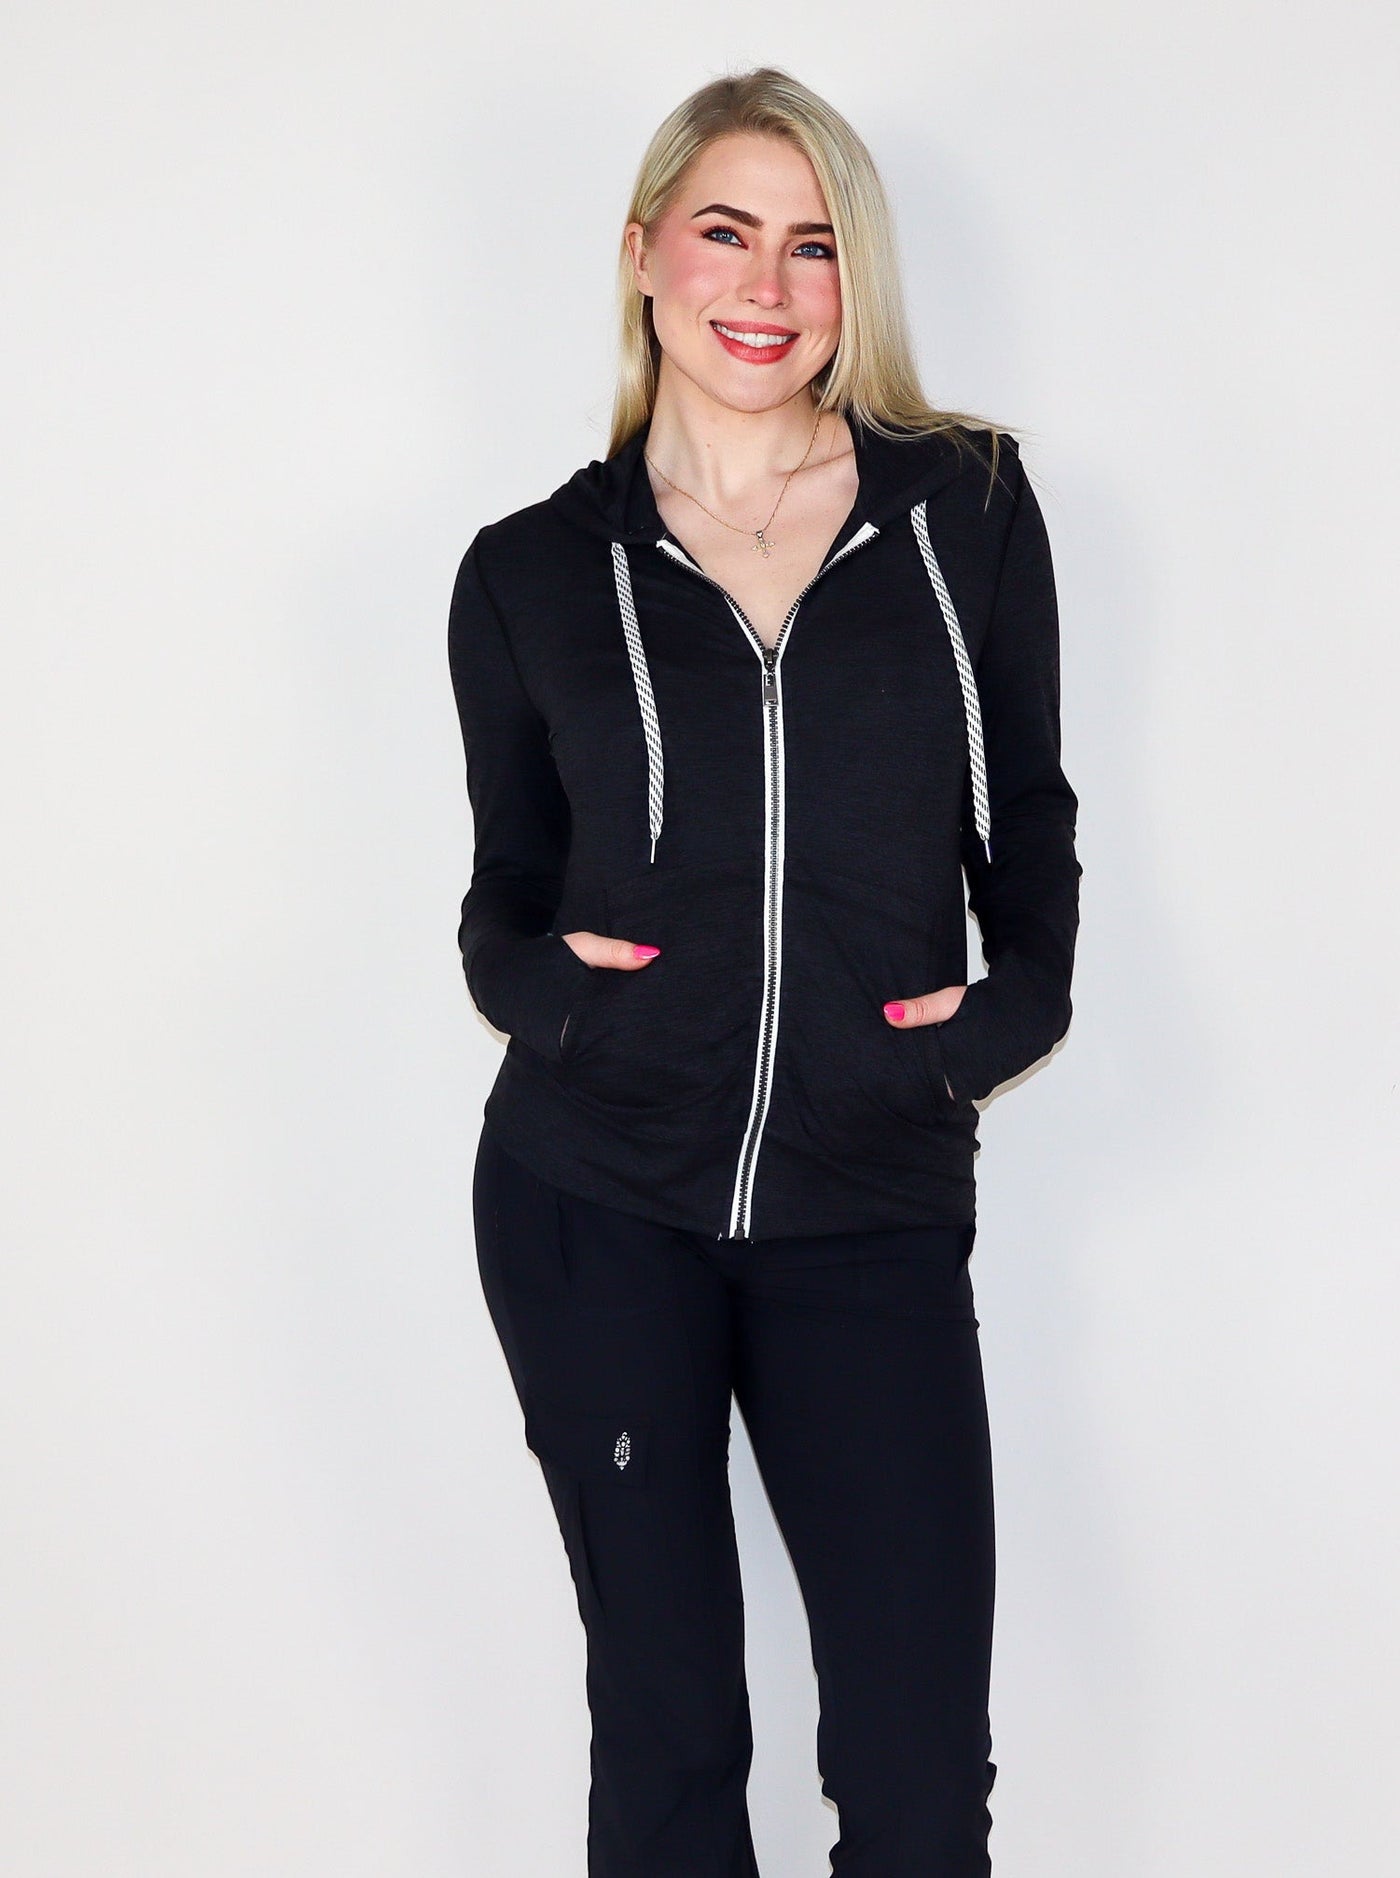 Model is wearing a deep charcoal colored fitted zip up with white trimming and white drawstrings.